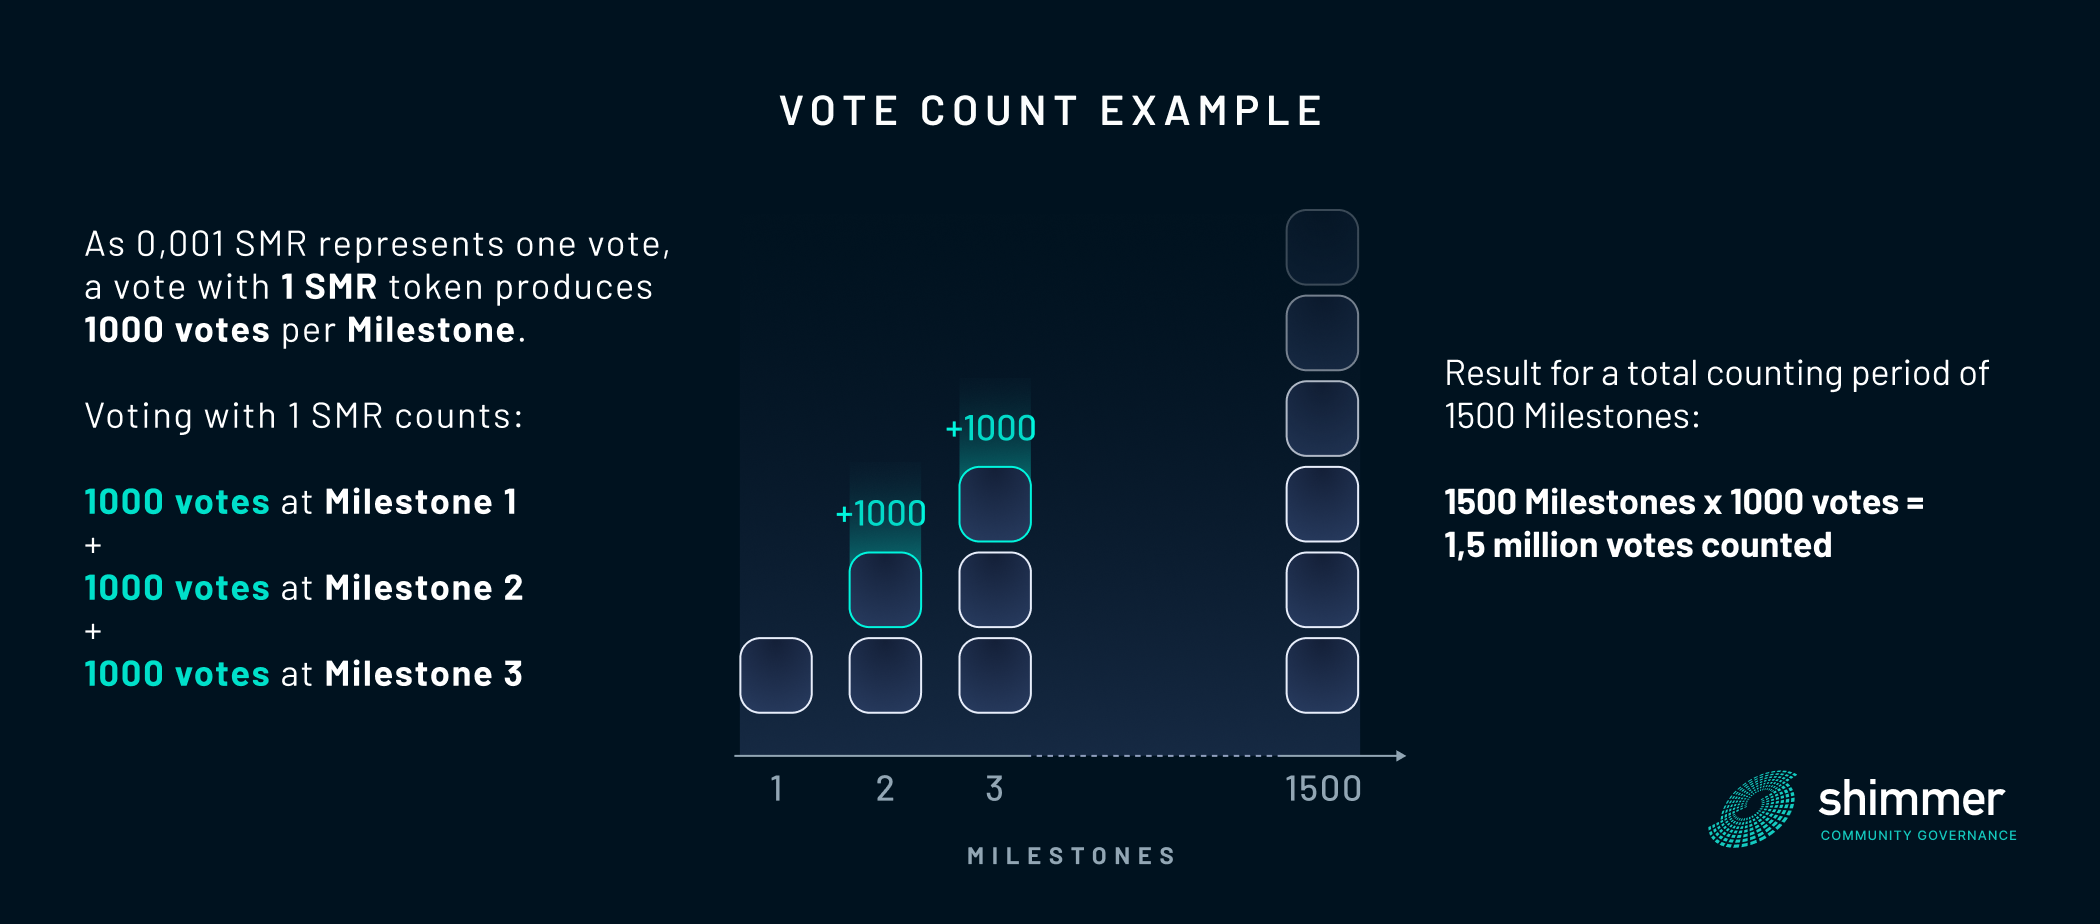 Vote counting example